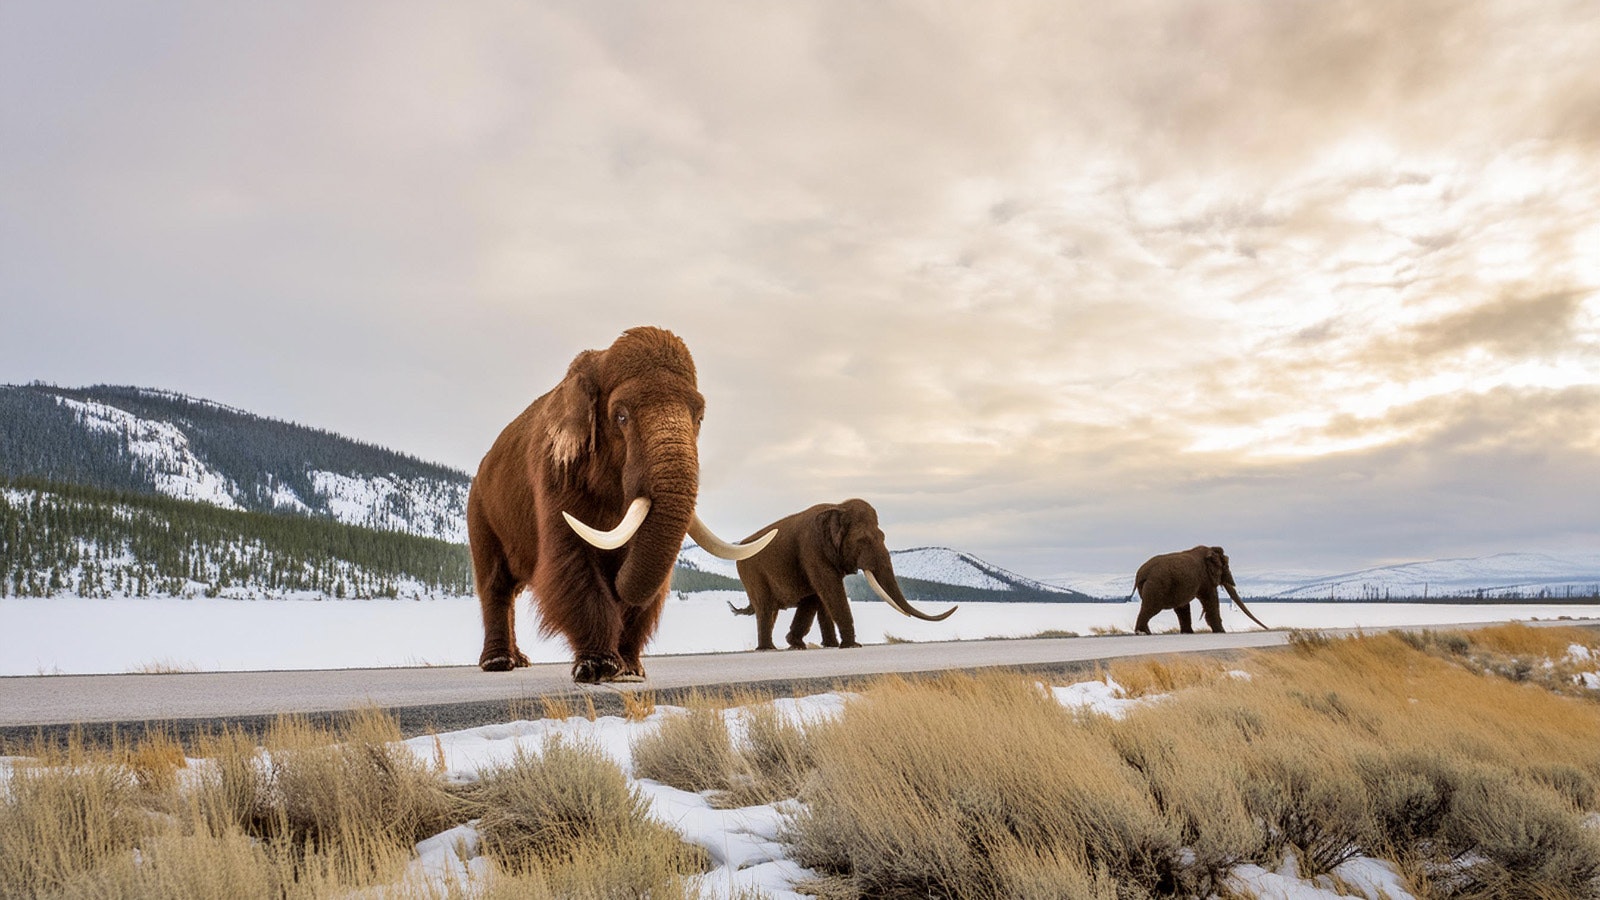 This illustration generated by PhotoShop's artificial intelligence generator shows what it could look like if prehistoric wooly mammoths were introduced into Yellowstone National Park.